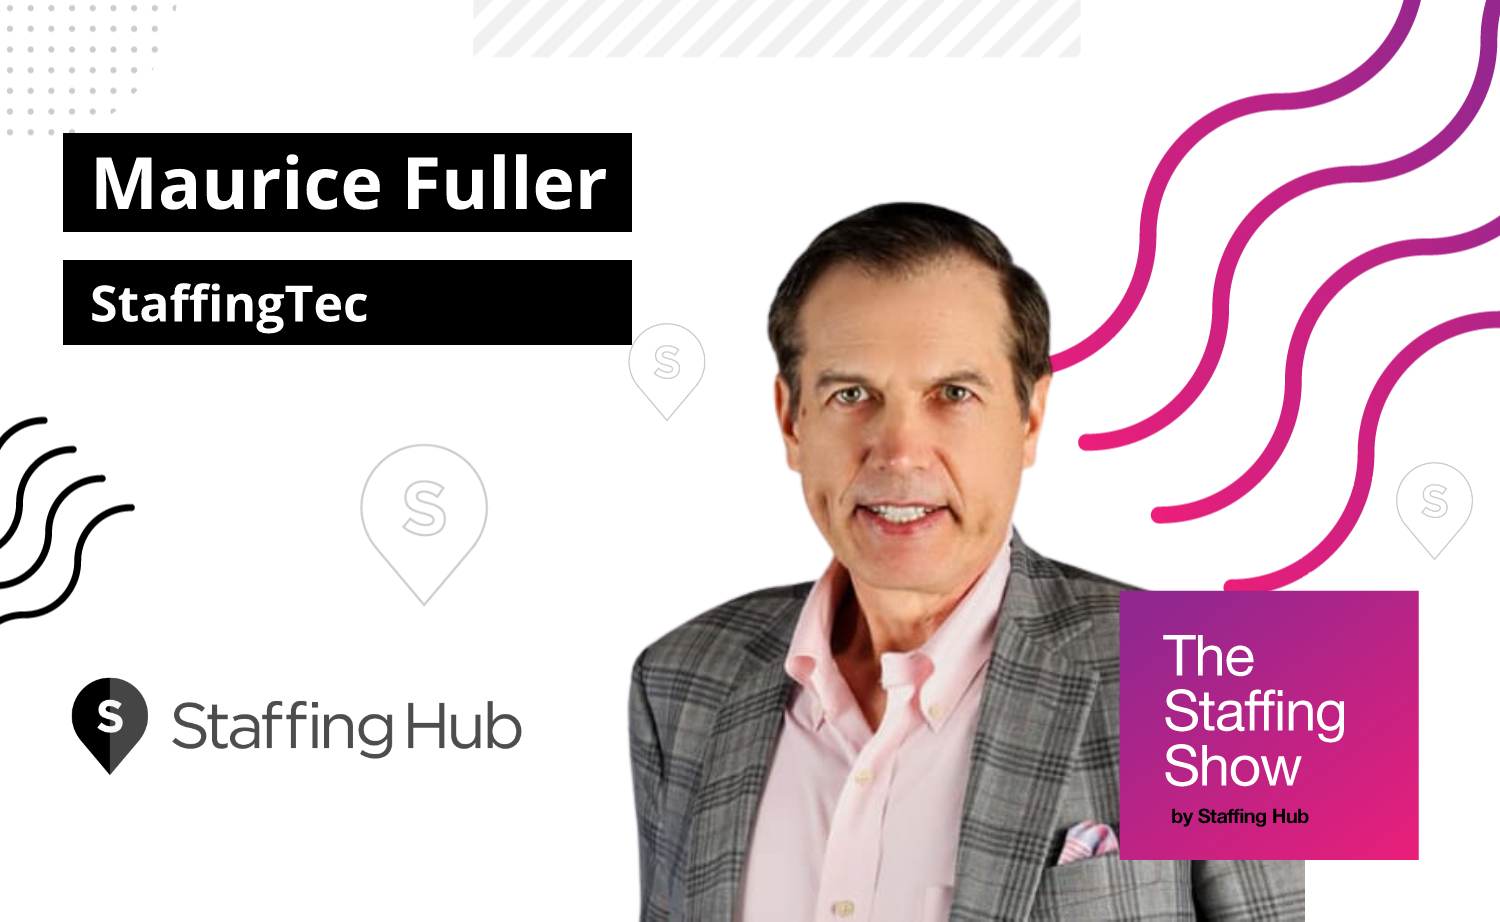 Maurice Fuller, CXO of Staffing Tec, on the Advancement of Automation and AI in Staffing